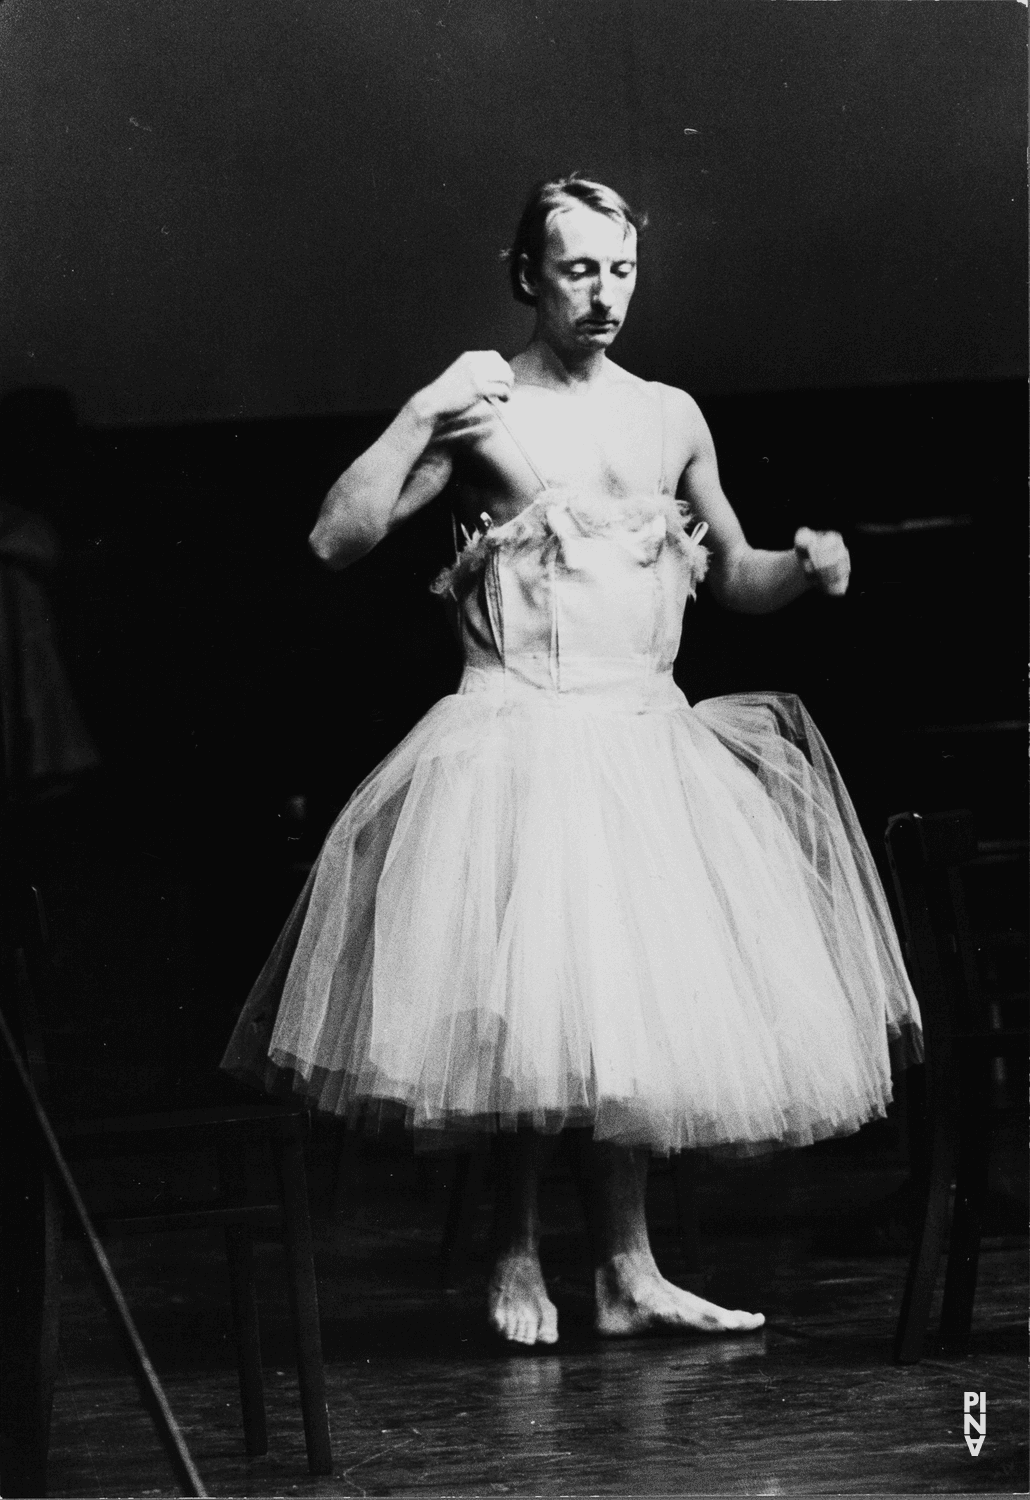 Dominique Mercy in “Bandoneon” by Pina Bausch